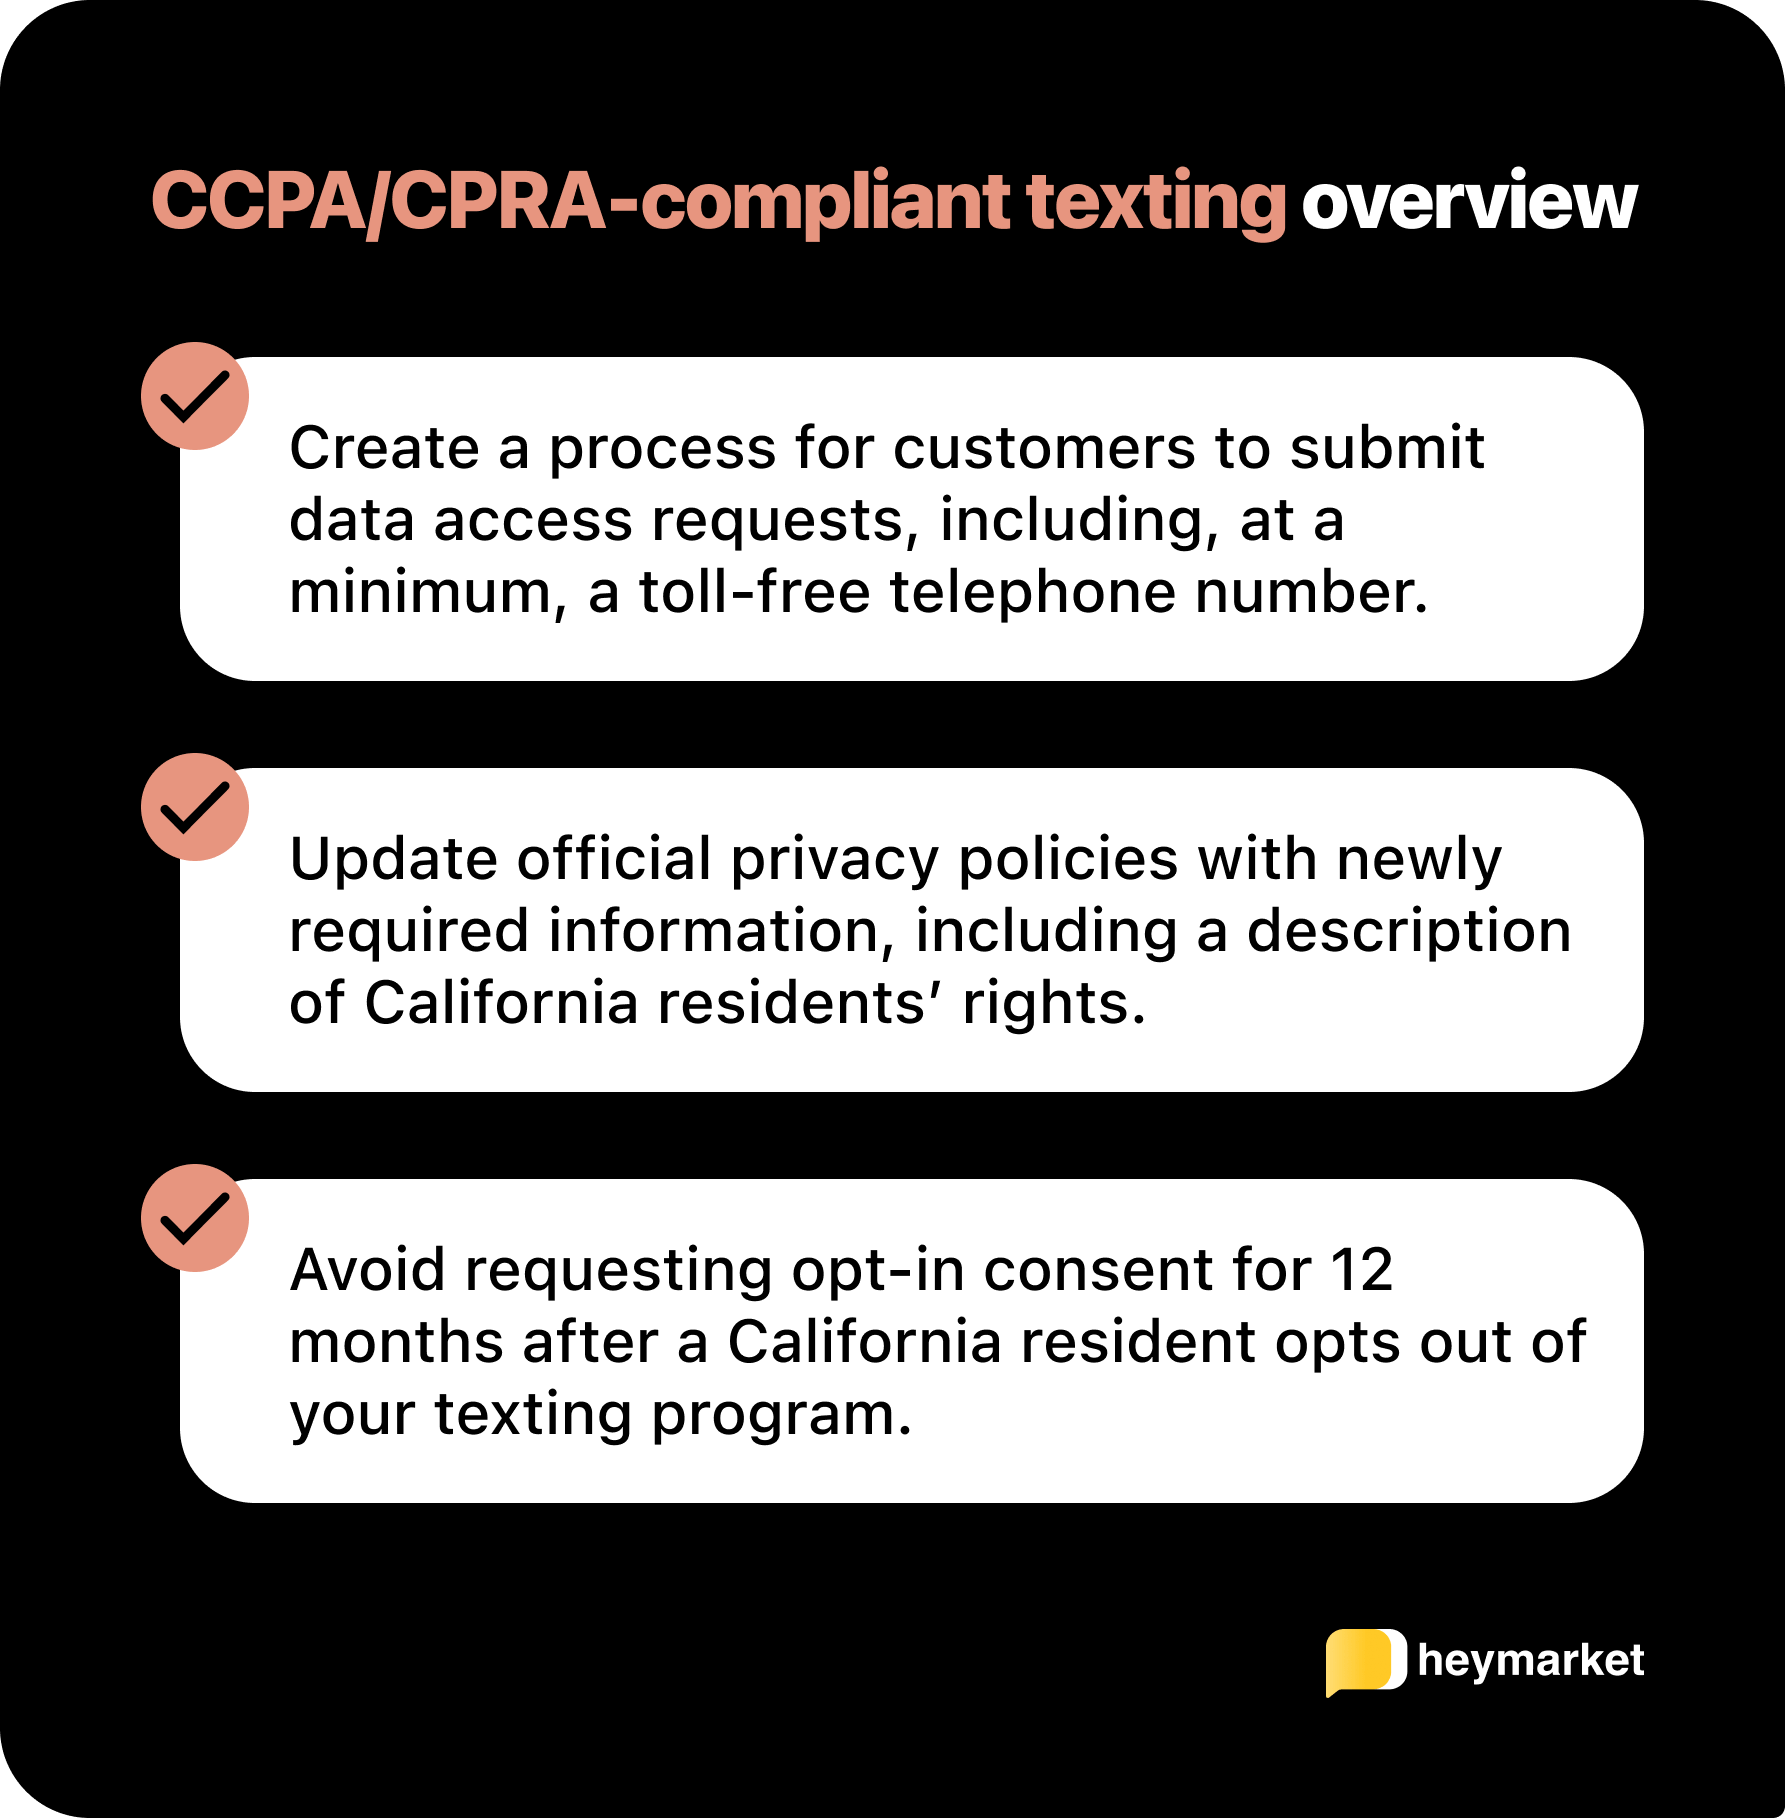 Summary of CPRA-compliant text messaging